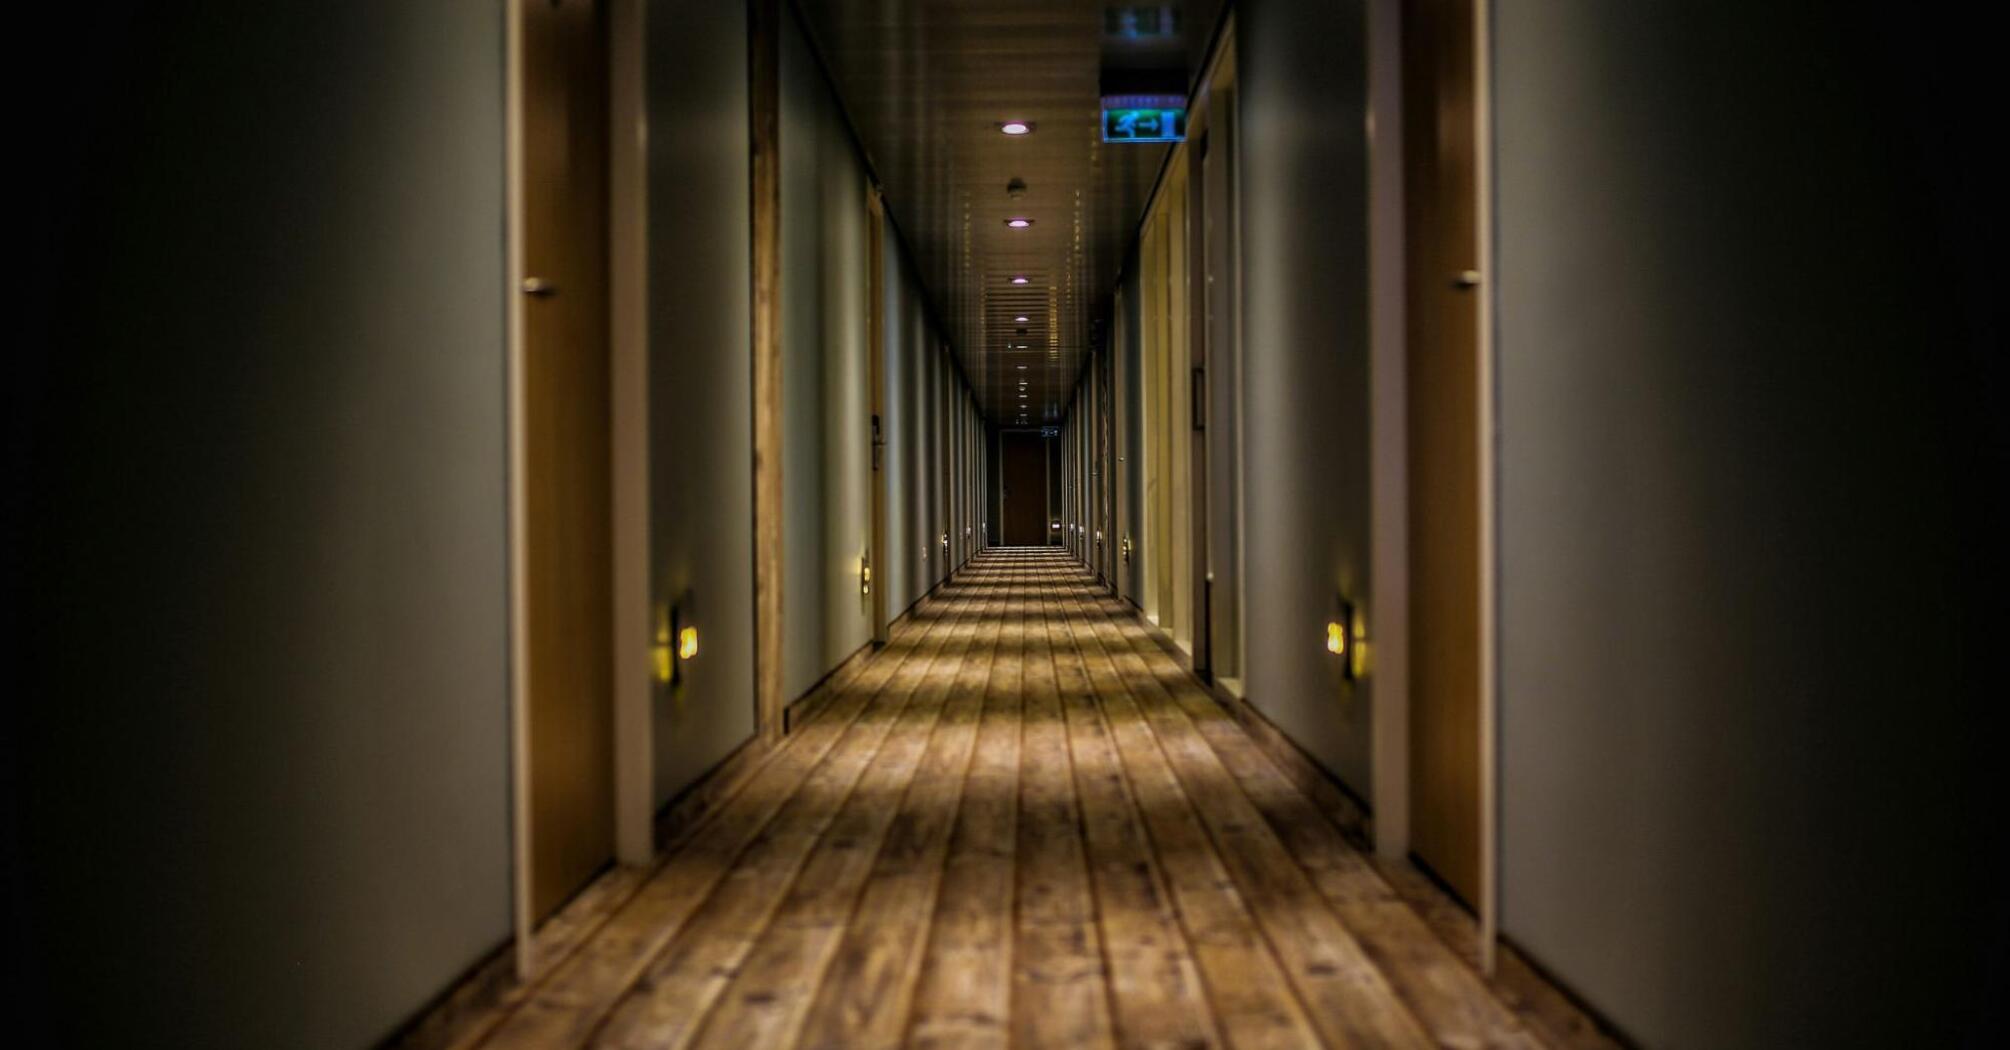 A long corridor with a wooden floor and rows of closed doors